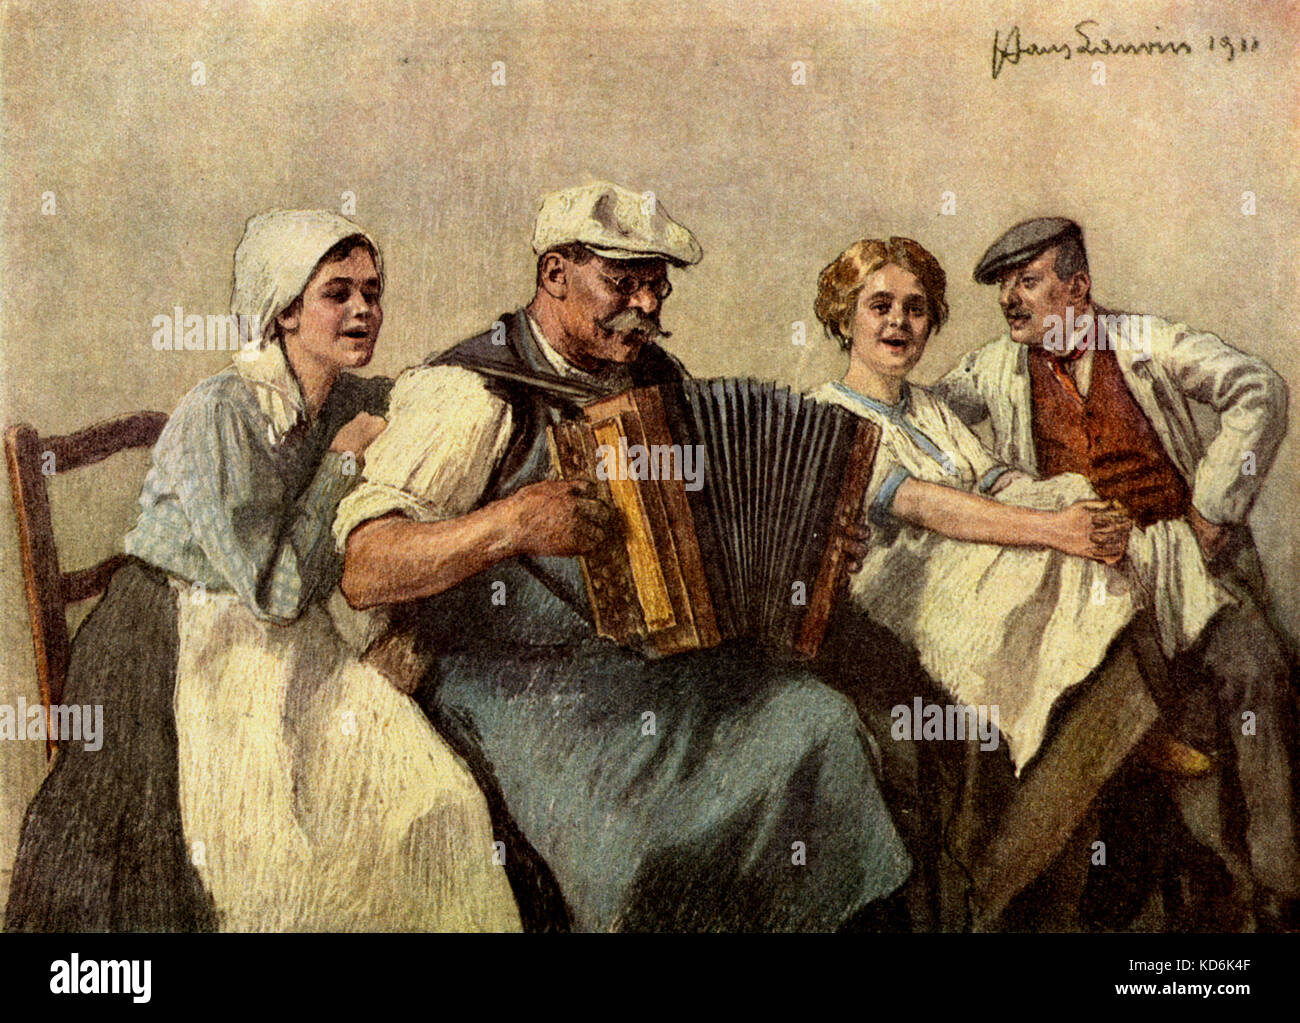 Accordionist playing for enthusiastic audience sitting next to him, in early 20th century Vienna. Illustration by Hans Larwin for Viennese book of songs, entitled 'Häusliche Musik', dated 1911. Pastel. Vienna Music Scene.  Work break? Stock Photo